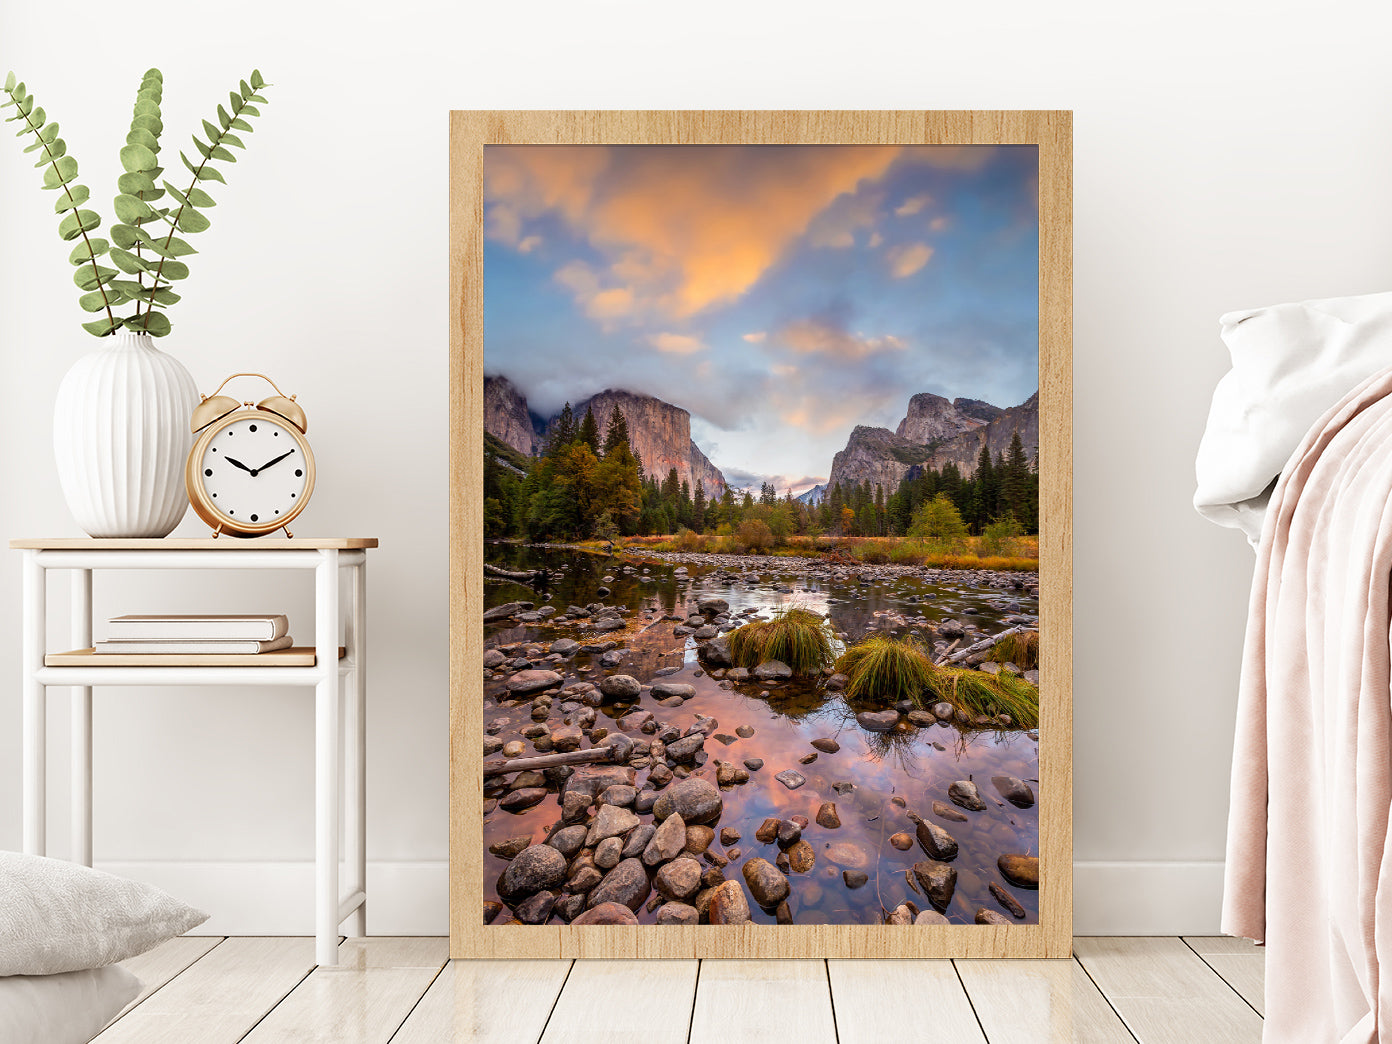 Landscape of Yosemite Park Autumn Glass Framed Wall Art, Ready to Hang Quality Print Without White Border Oak